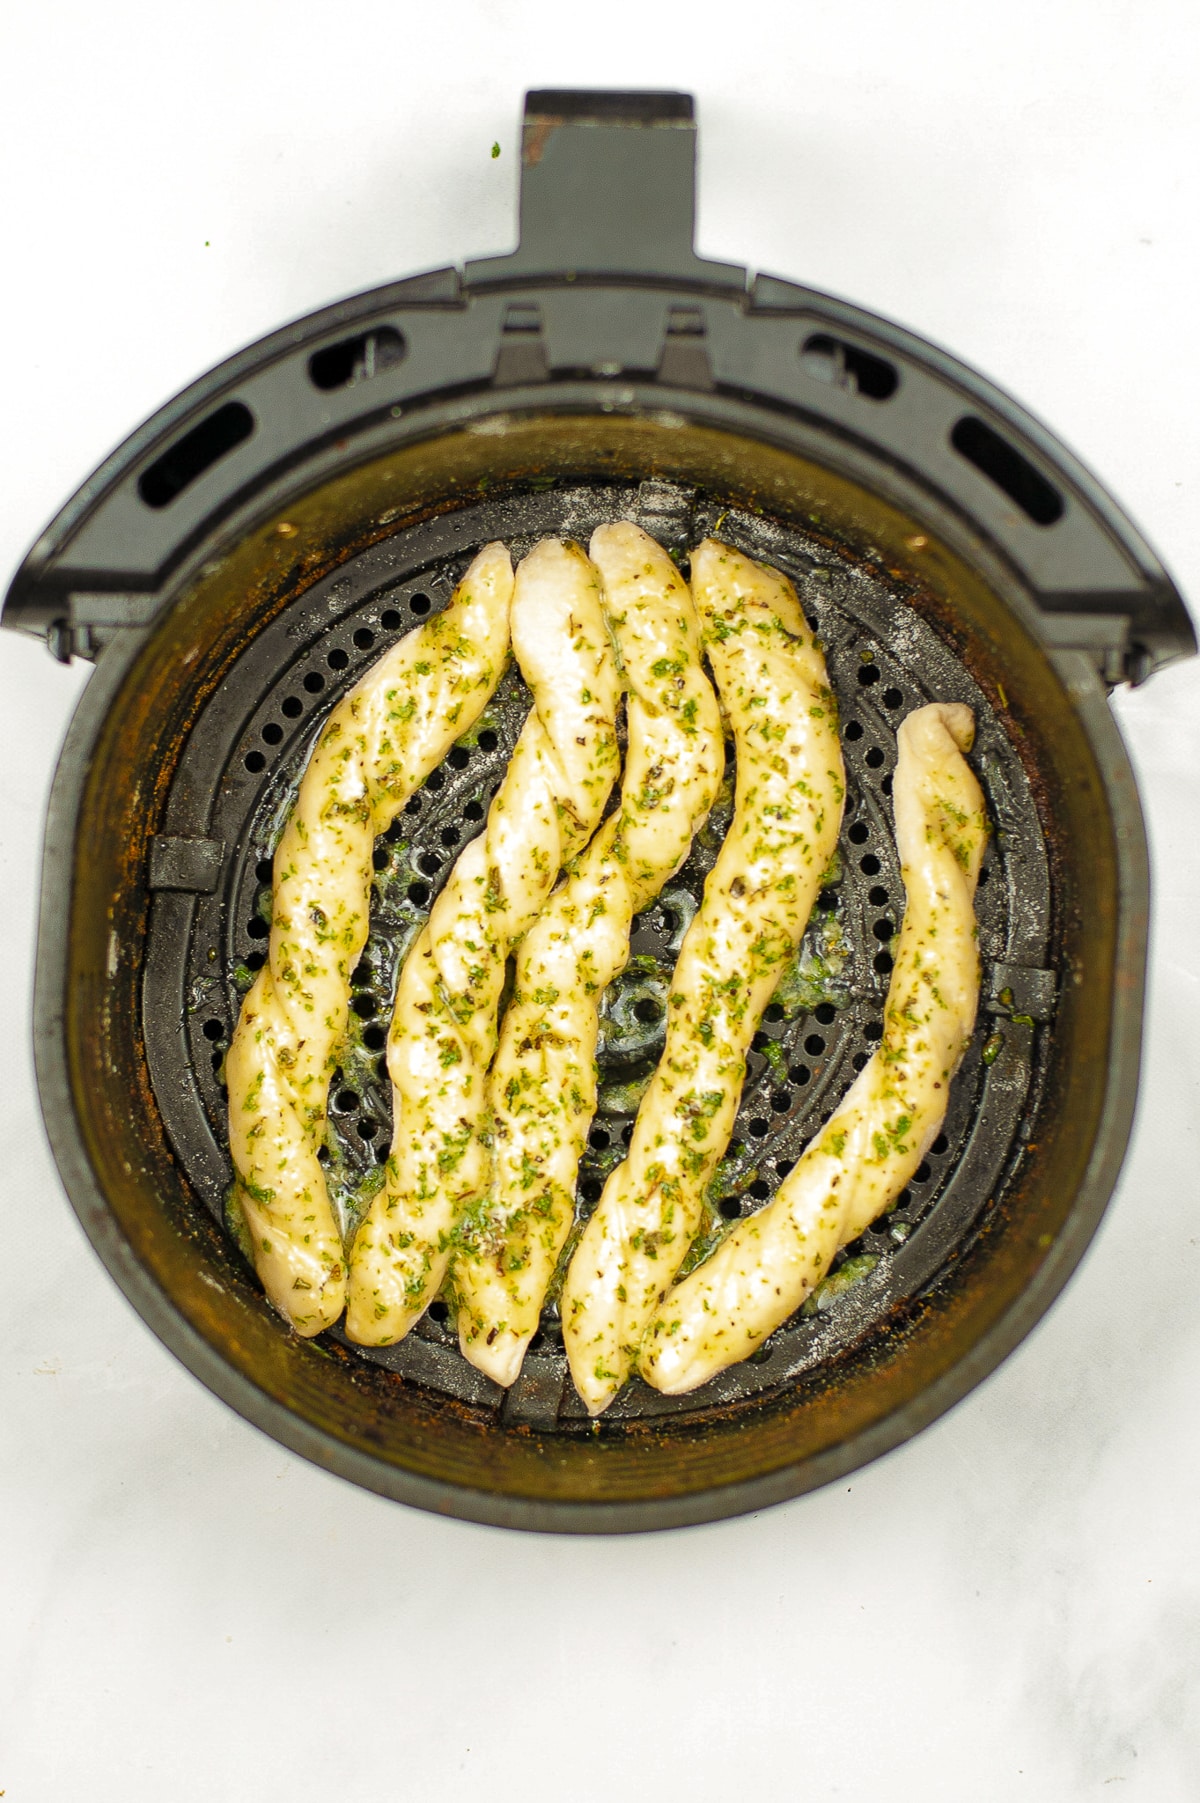 Raw breadstick dough cut into strips covered in butter and herbs in an air fryer basket from overhead.